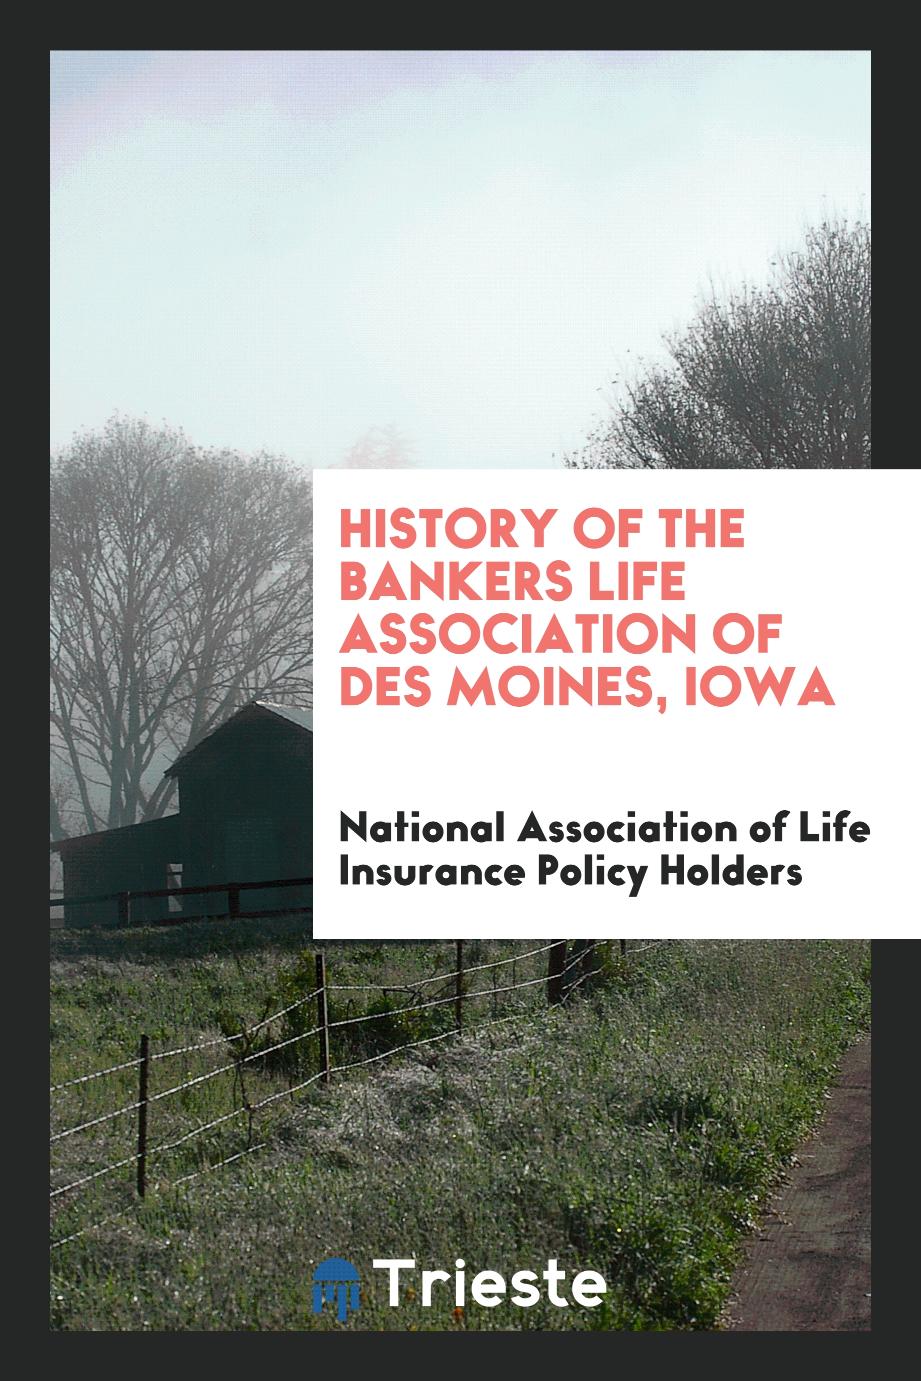 History of the Bankers Life Association of Des Moines, Iowa